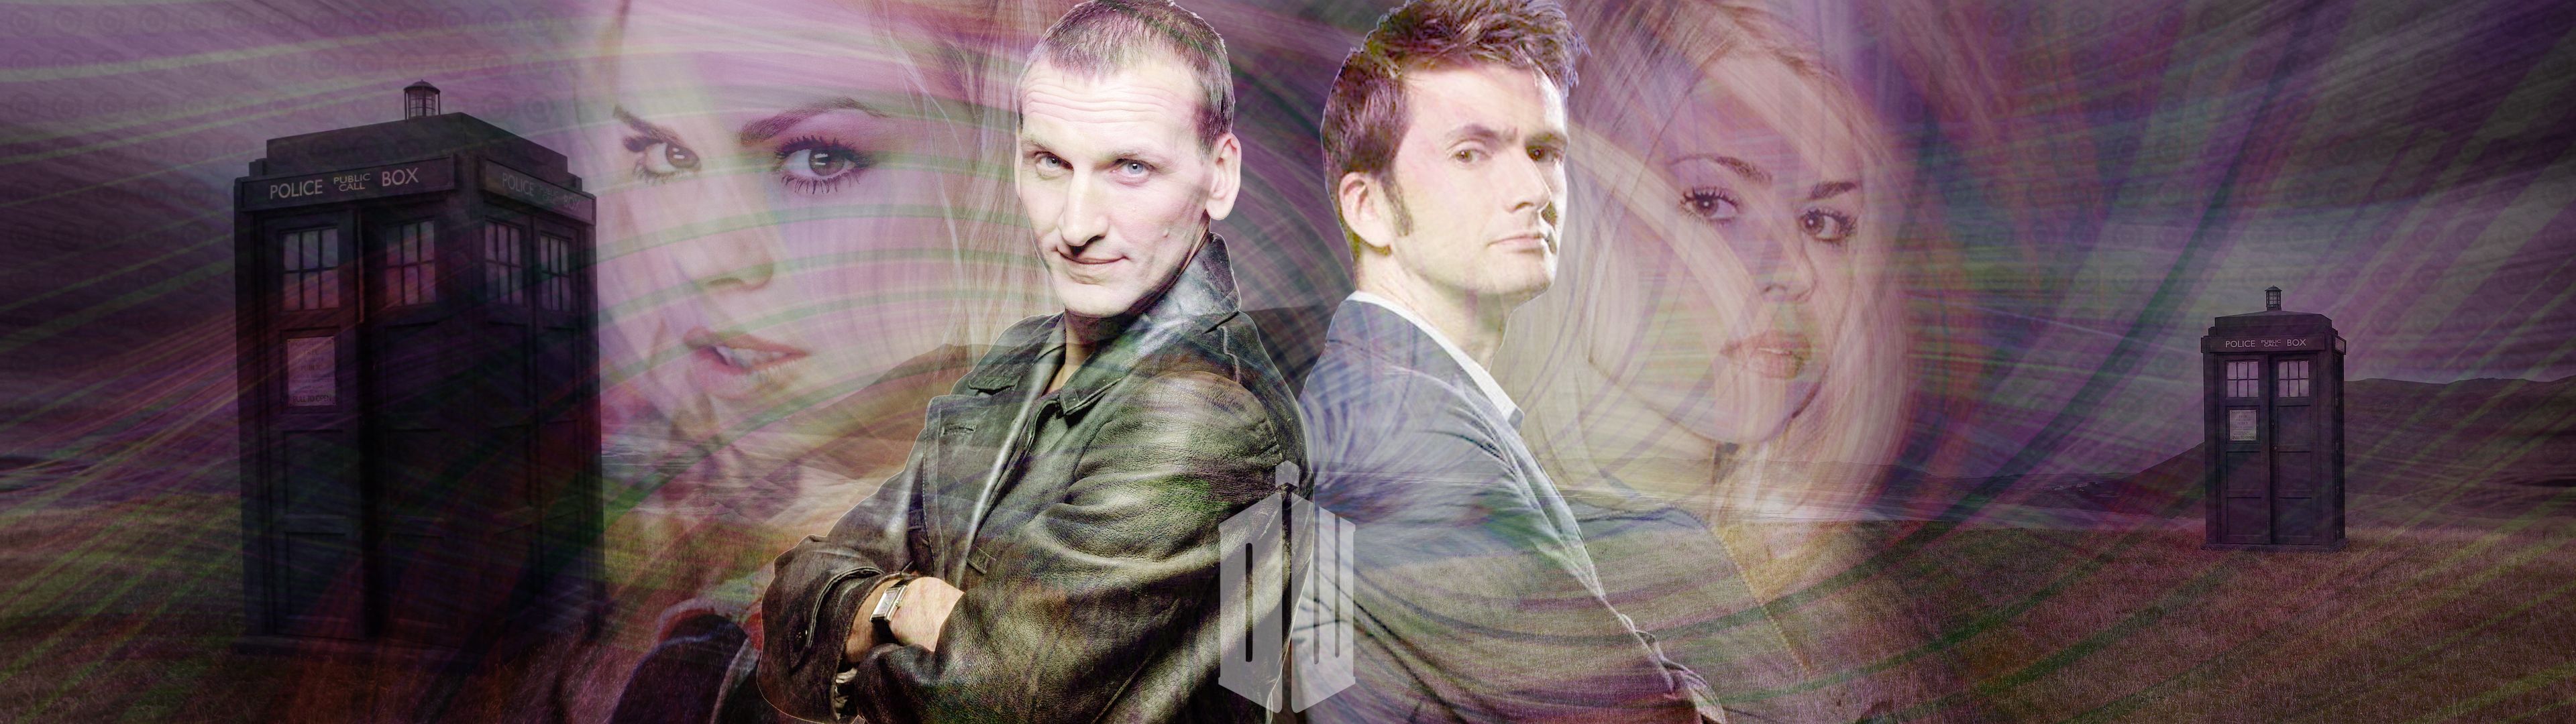 Free download 9th Doctor 10th Doctor and Rose [3840x1080]